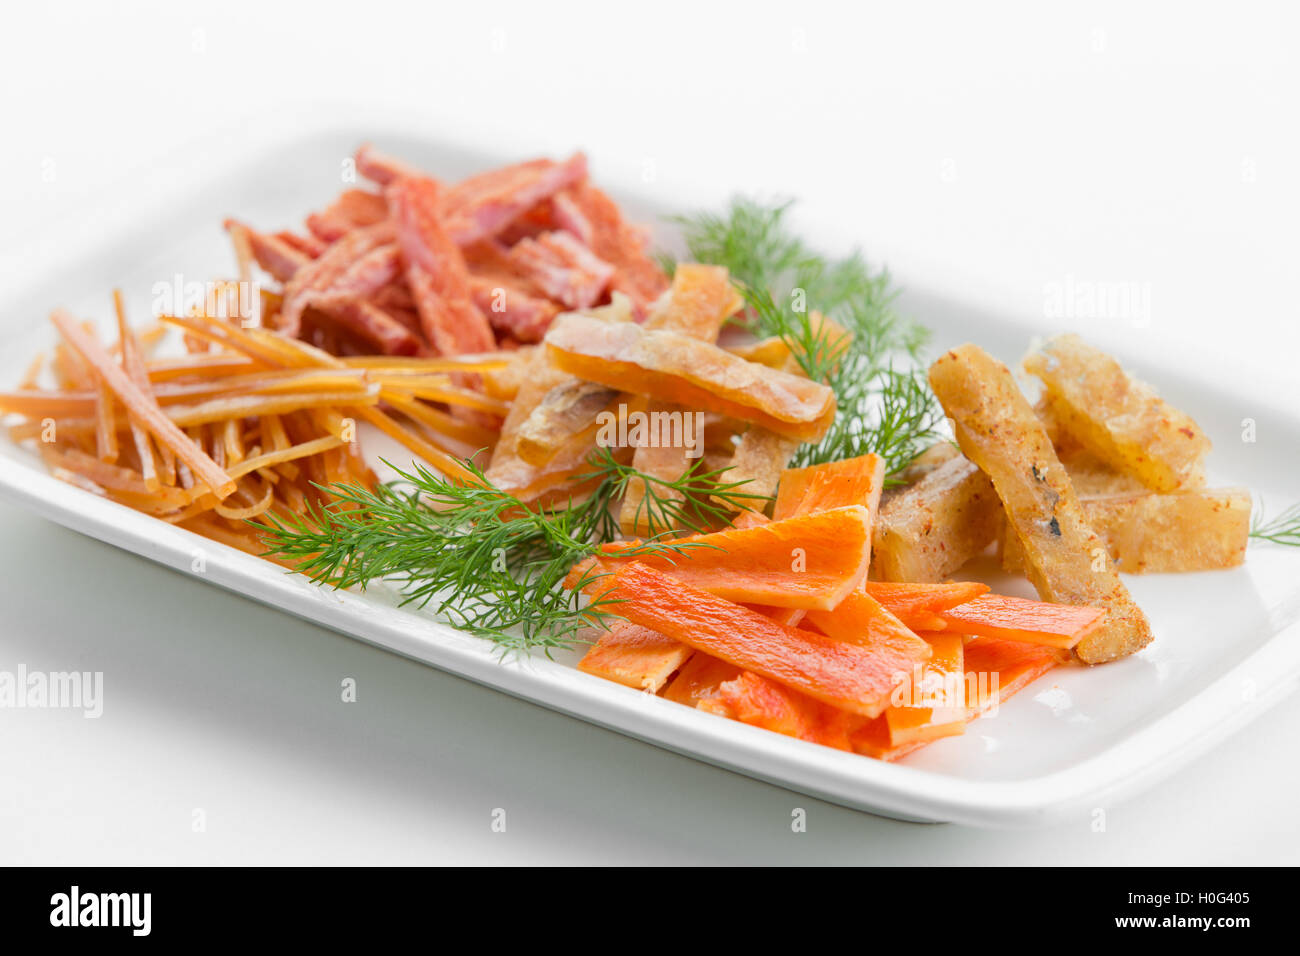 Fried fish platz with cumin and herbs on white plate Stock Photo